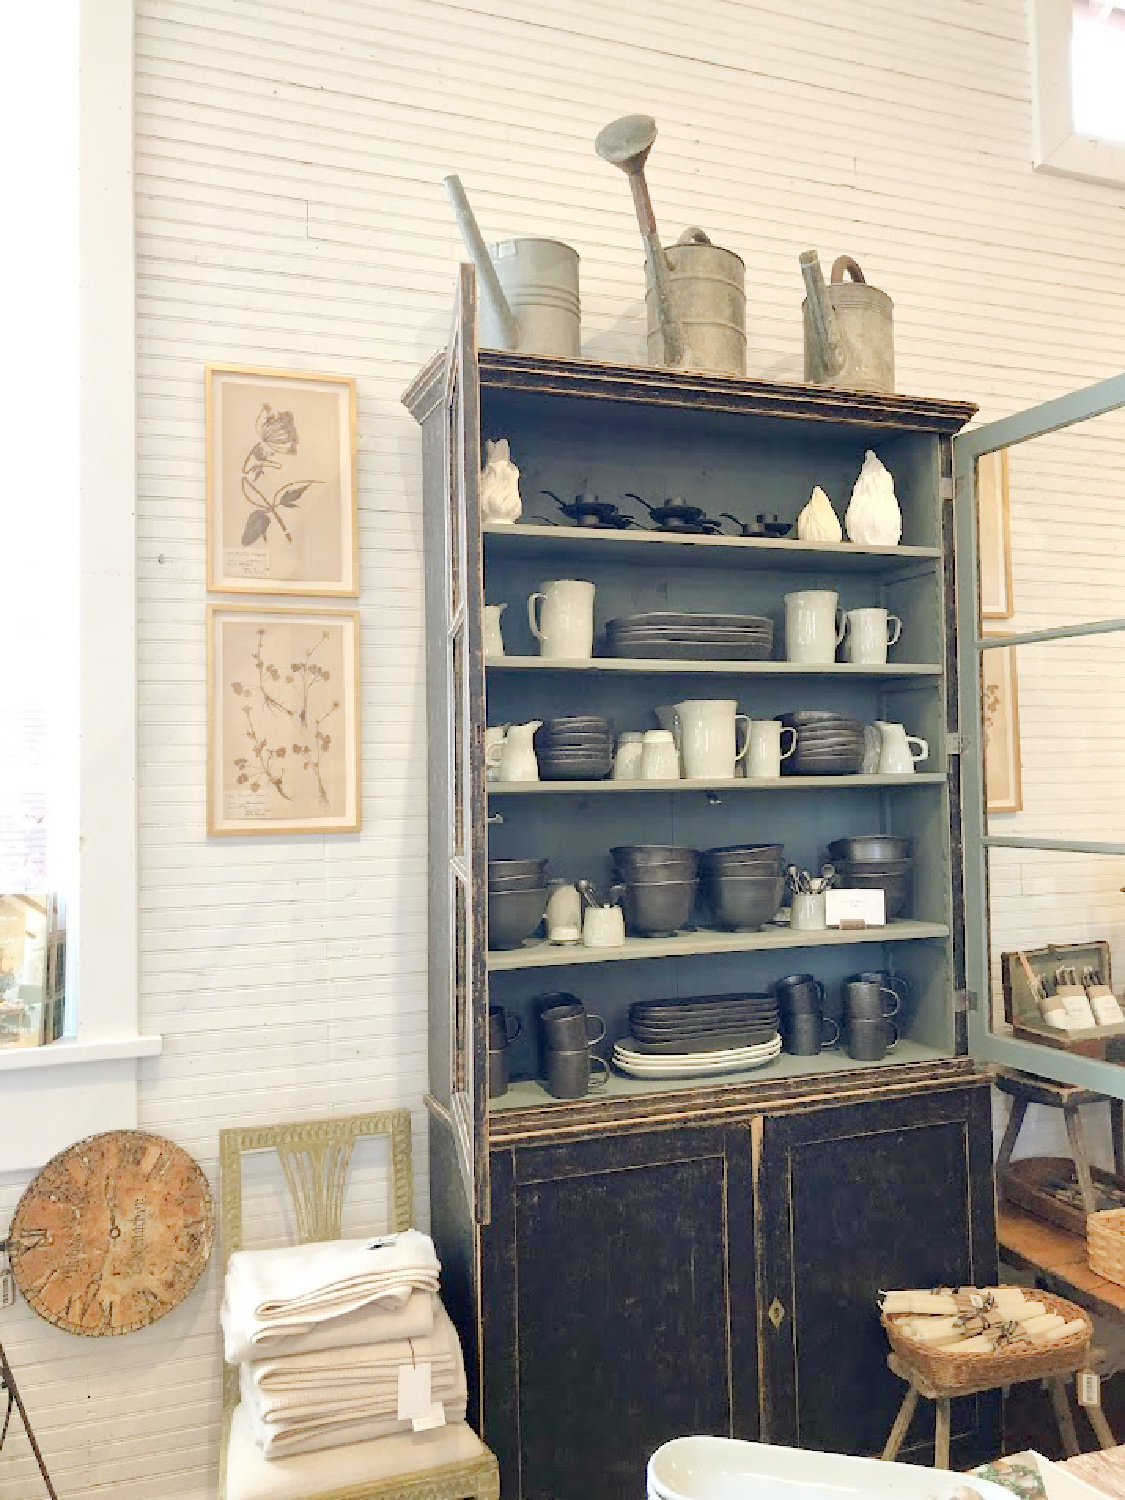 European country antiques, home decor, and clothing near Franklin - Patina Home & Garden from Giannettis in Leiper's Fork, TN - Hello Lovely Studio. #patinahome #leipersforktn